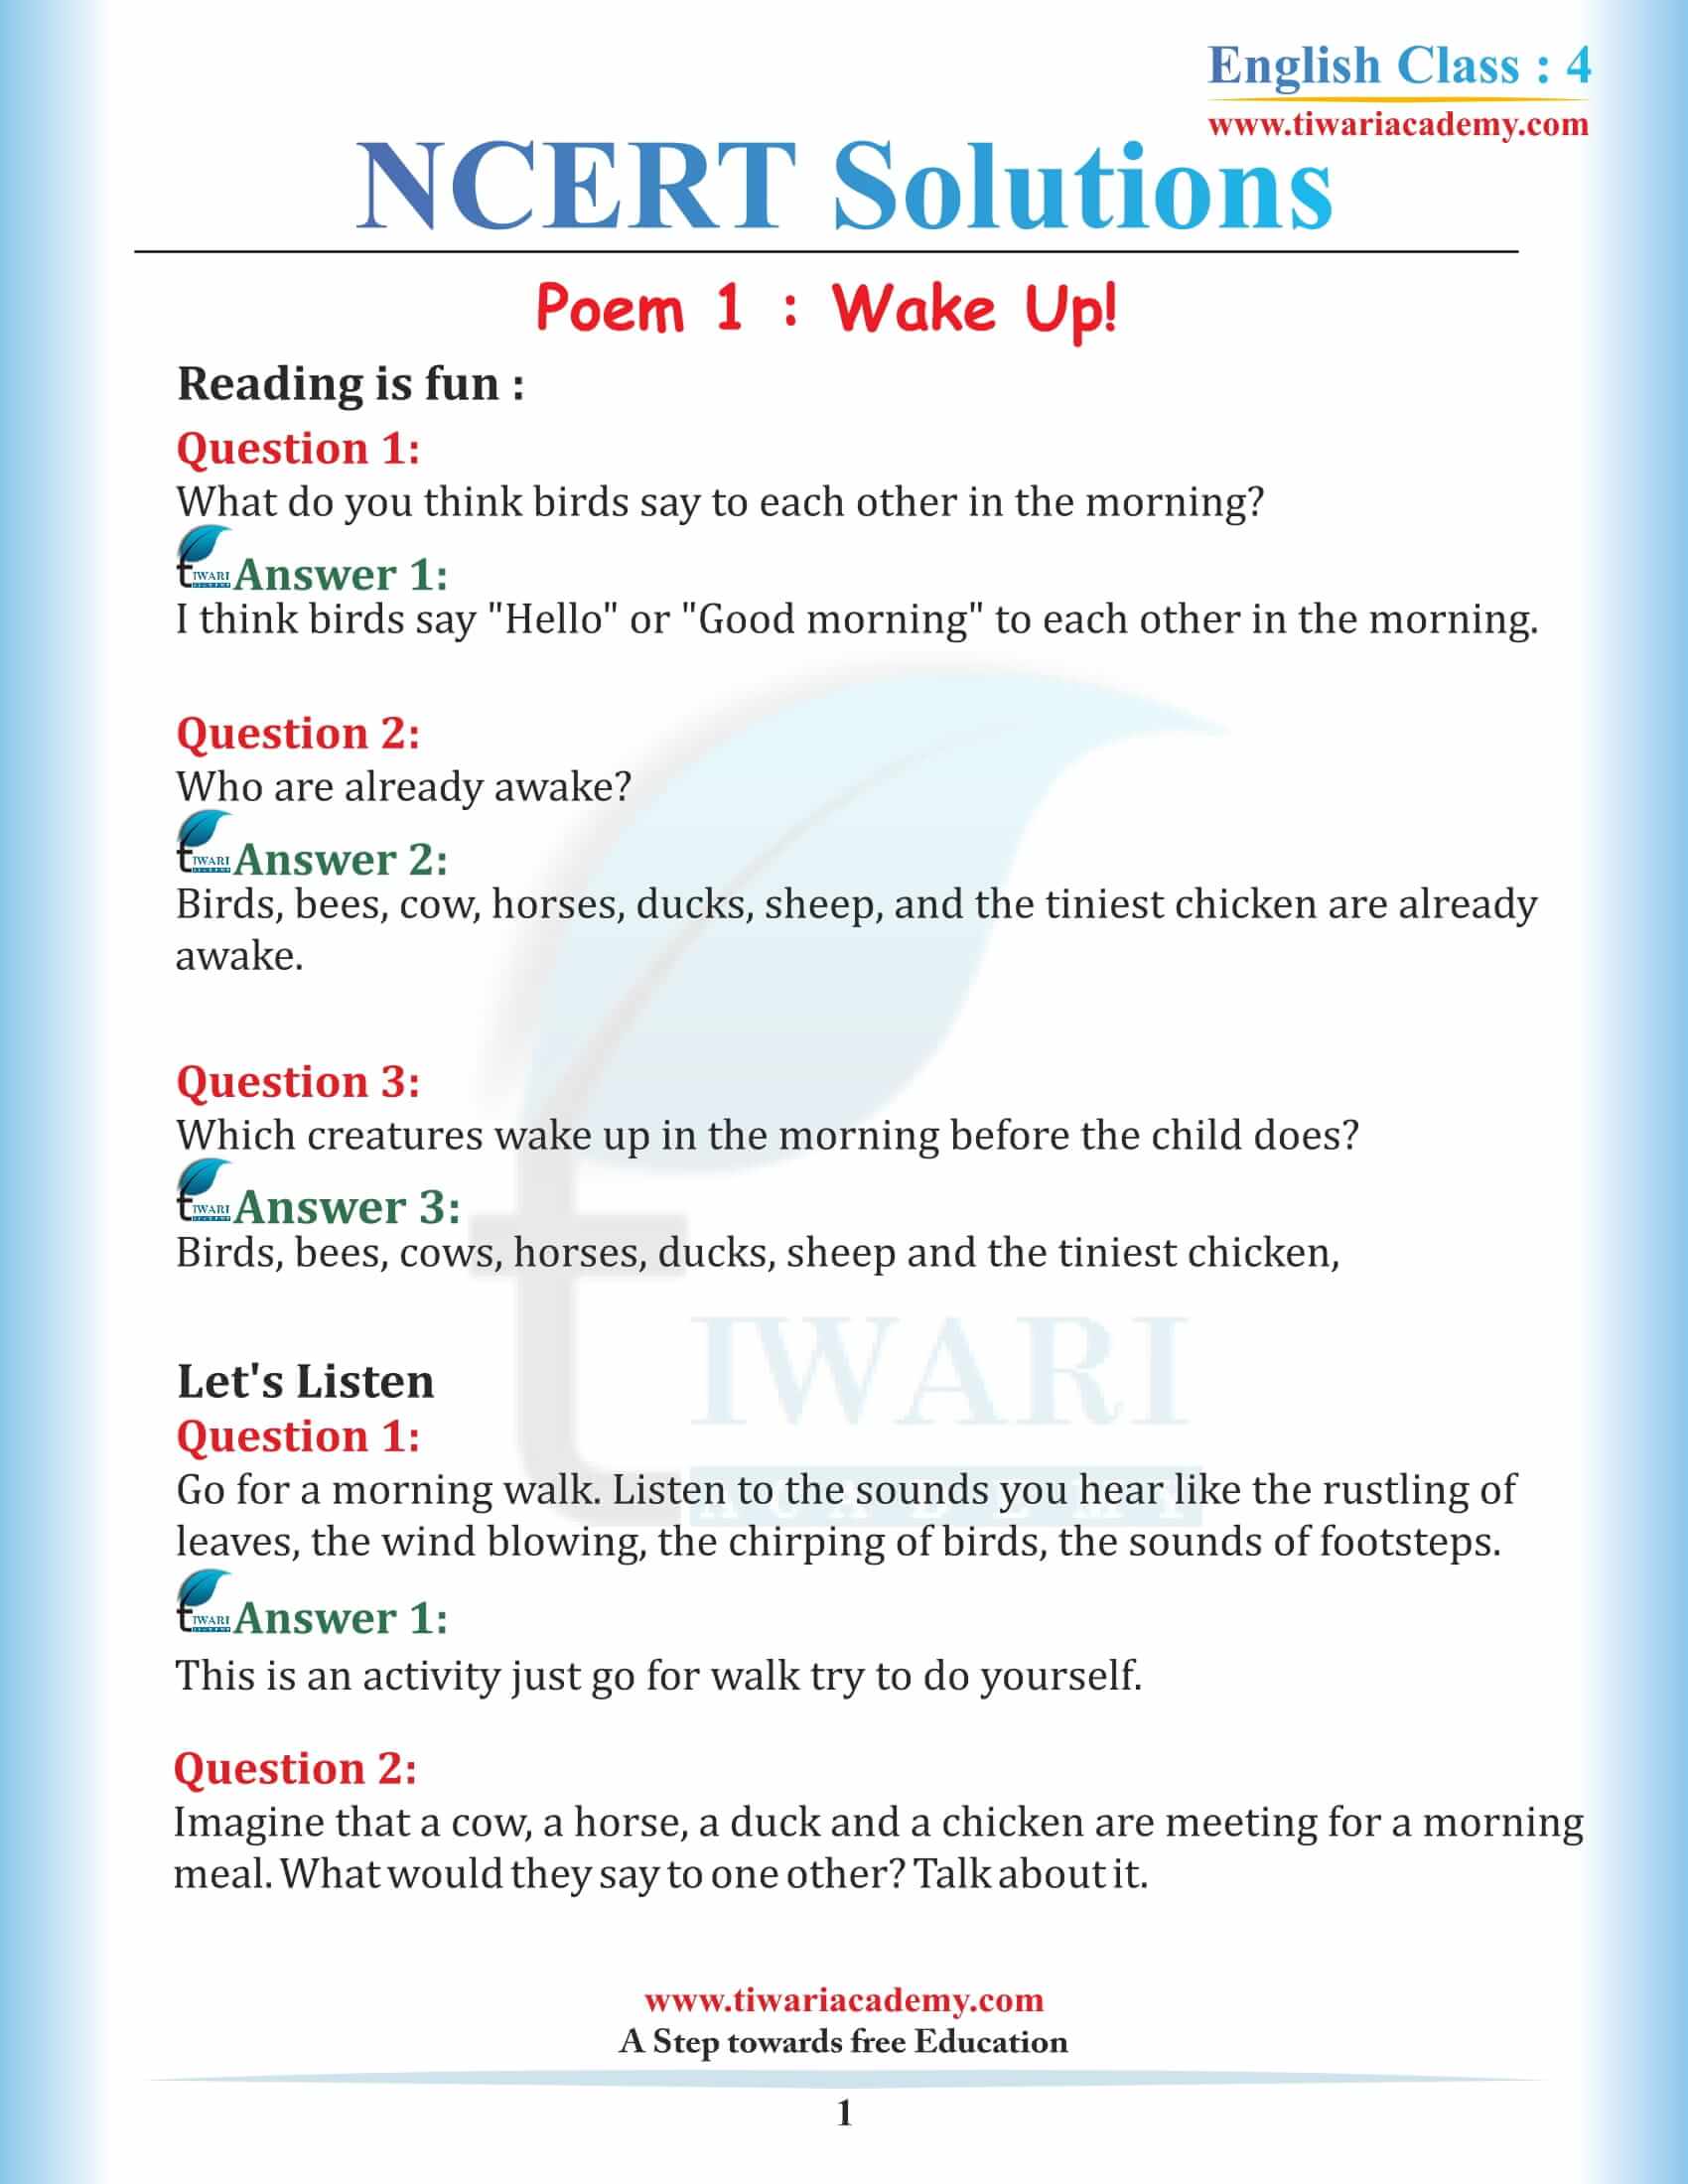 NCERT Solutions for Class 4 English Unit 1 Chapter 1 Wake Up